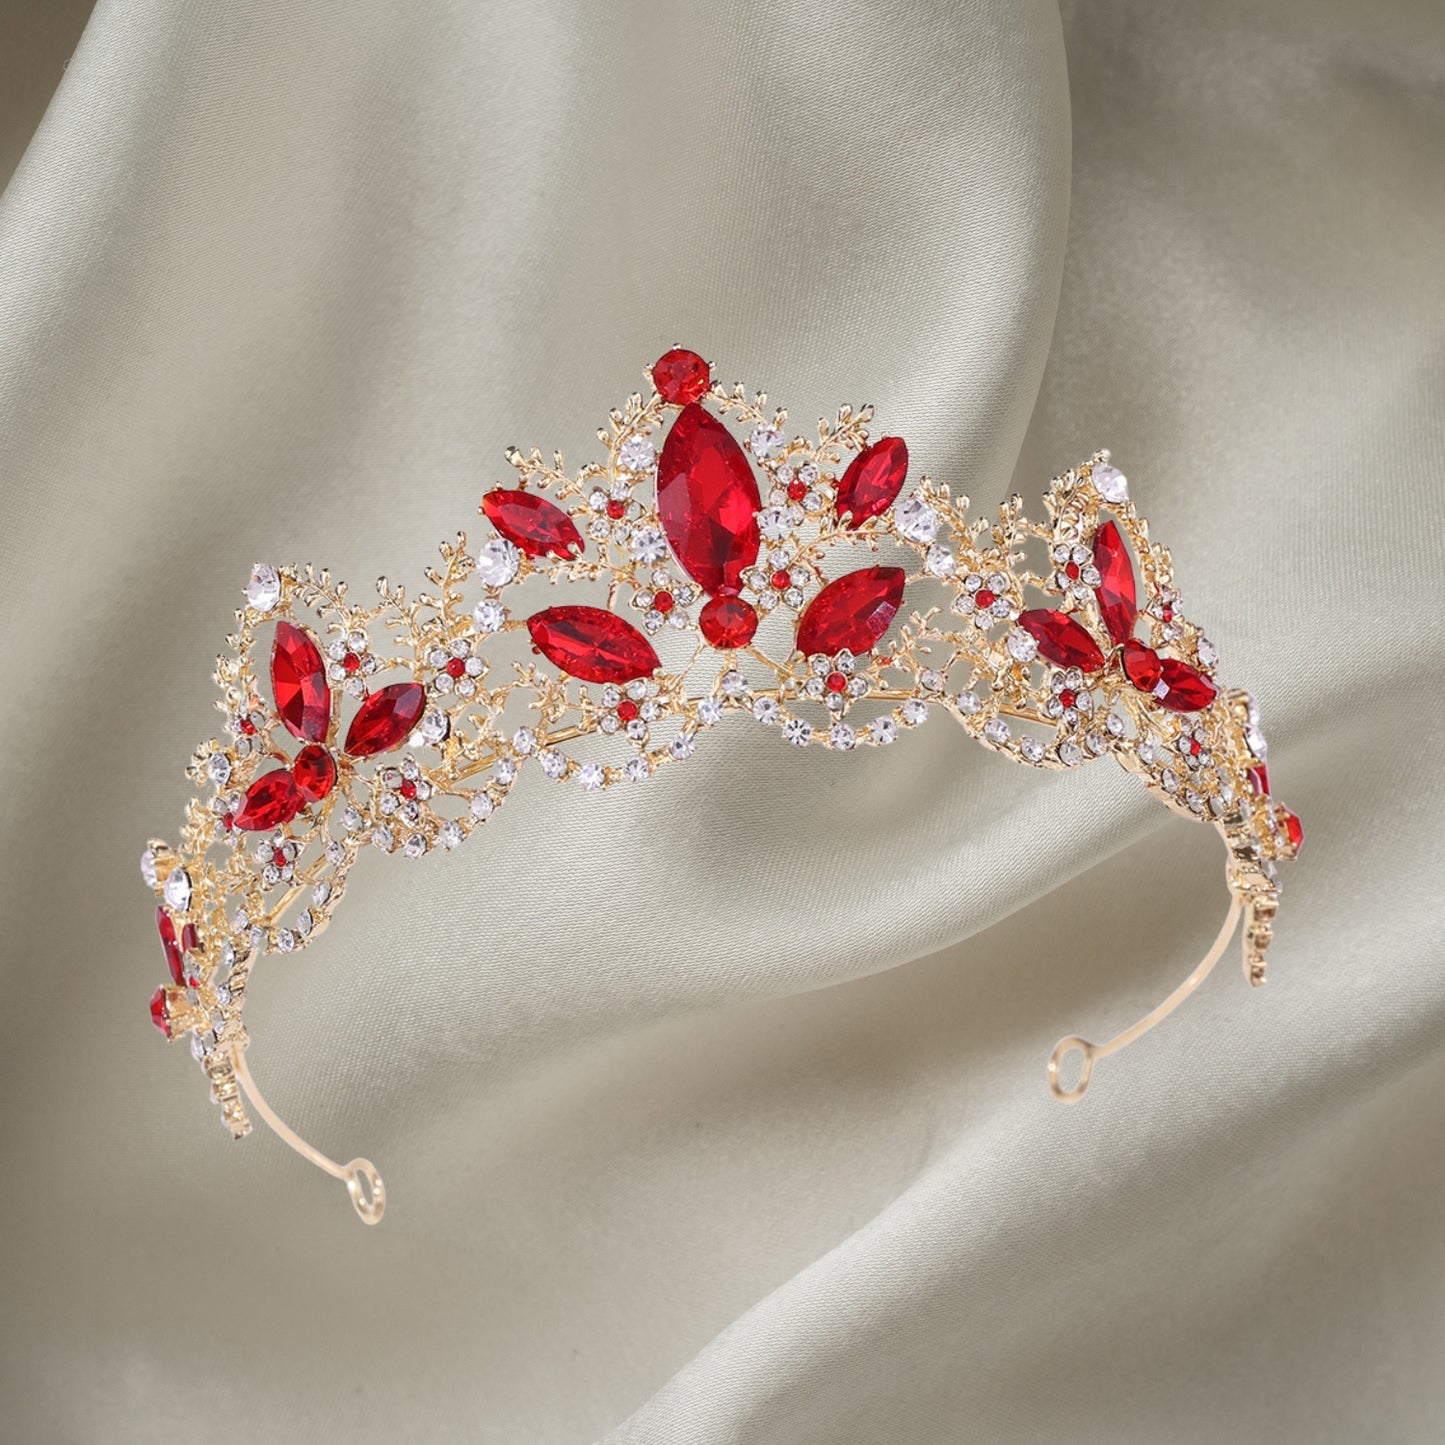 Queen Crown and Tiara Princess Crown for Women and Girls